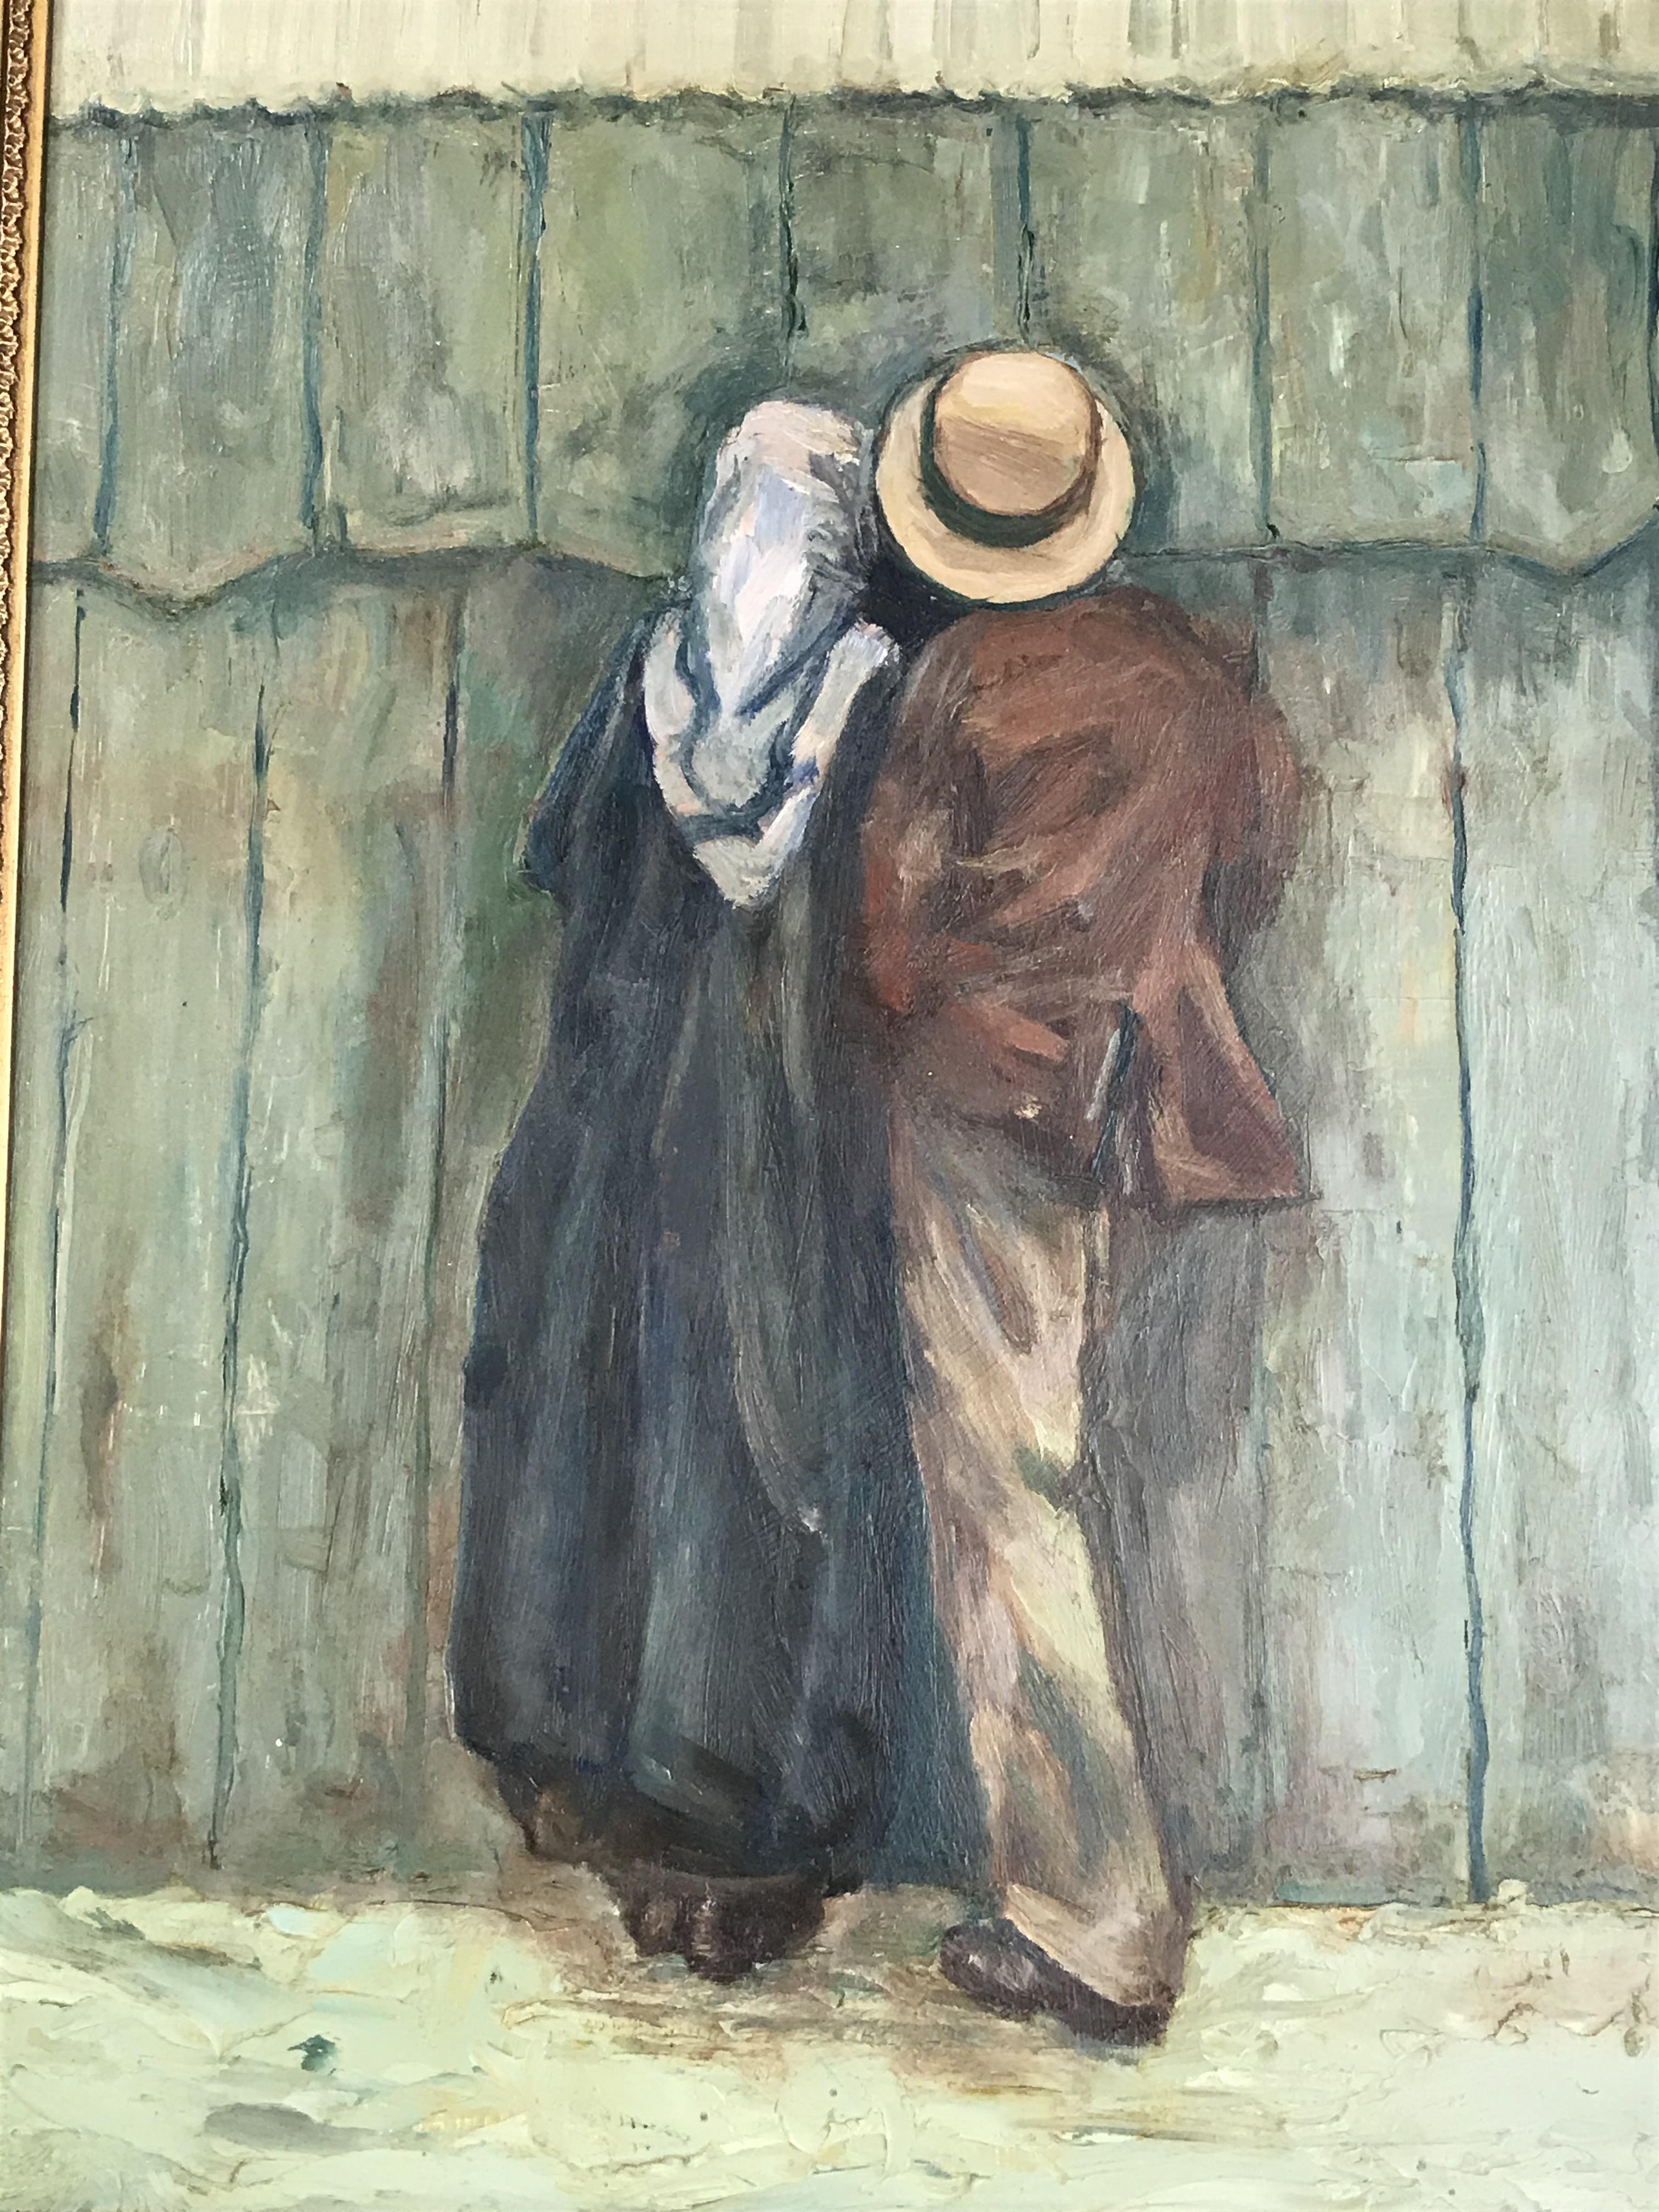 Monogrammed S, oil on board, 'Couple peering over a fence', in gilt frame, 44cm x 34cm